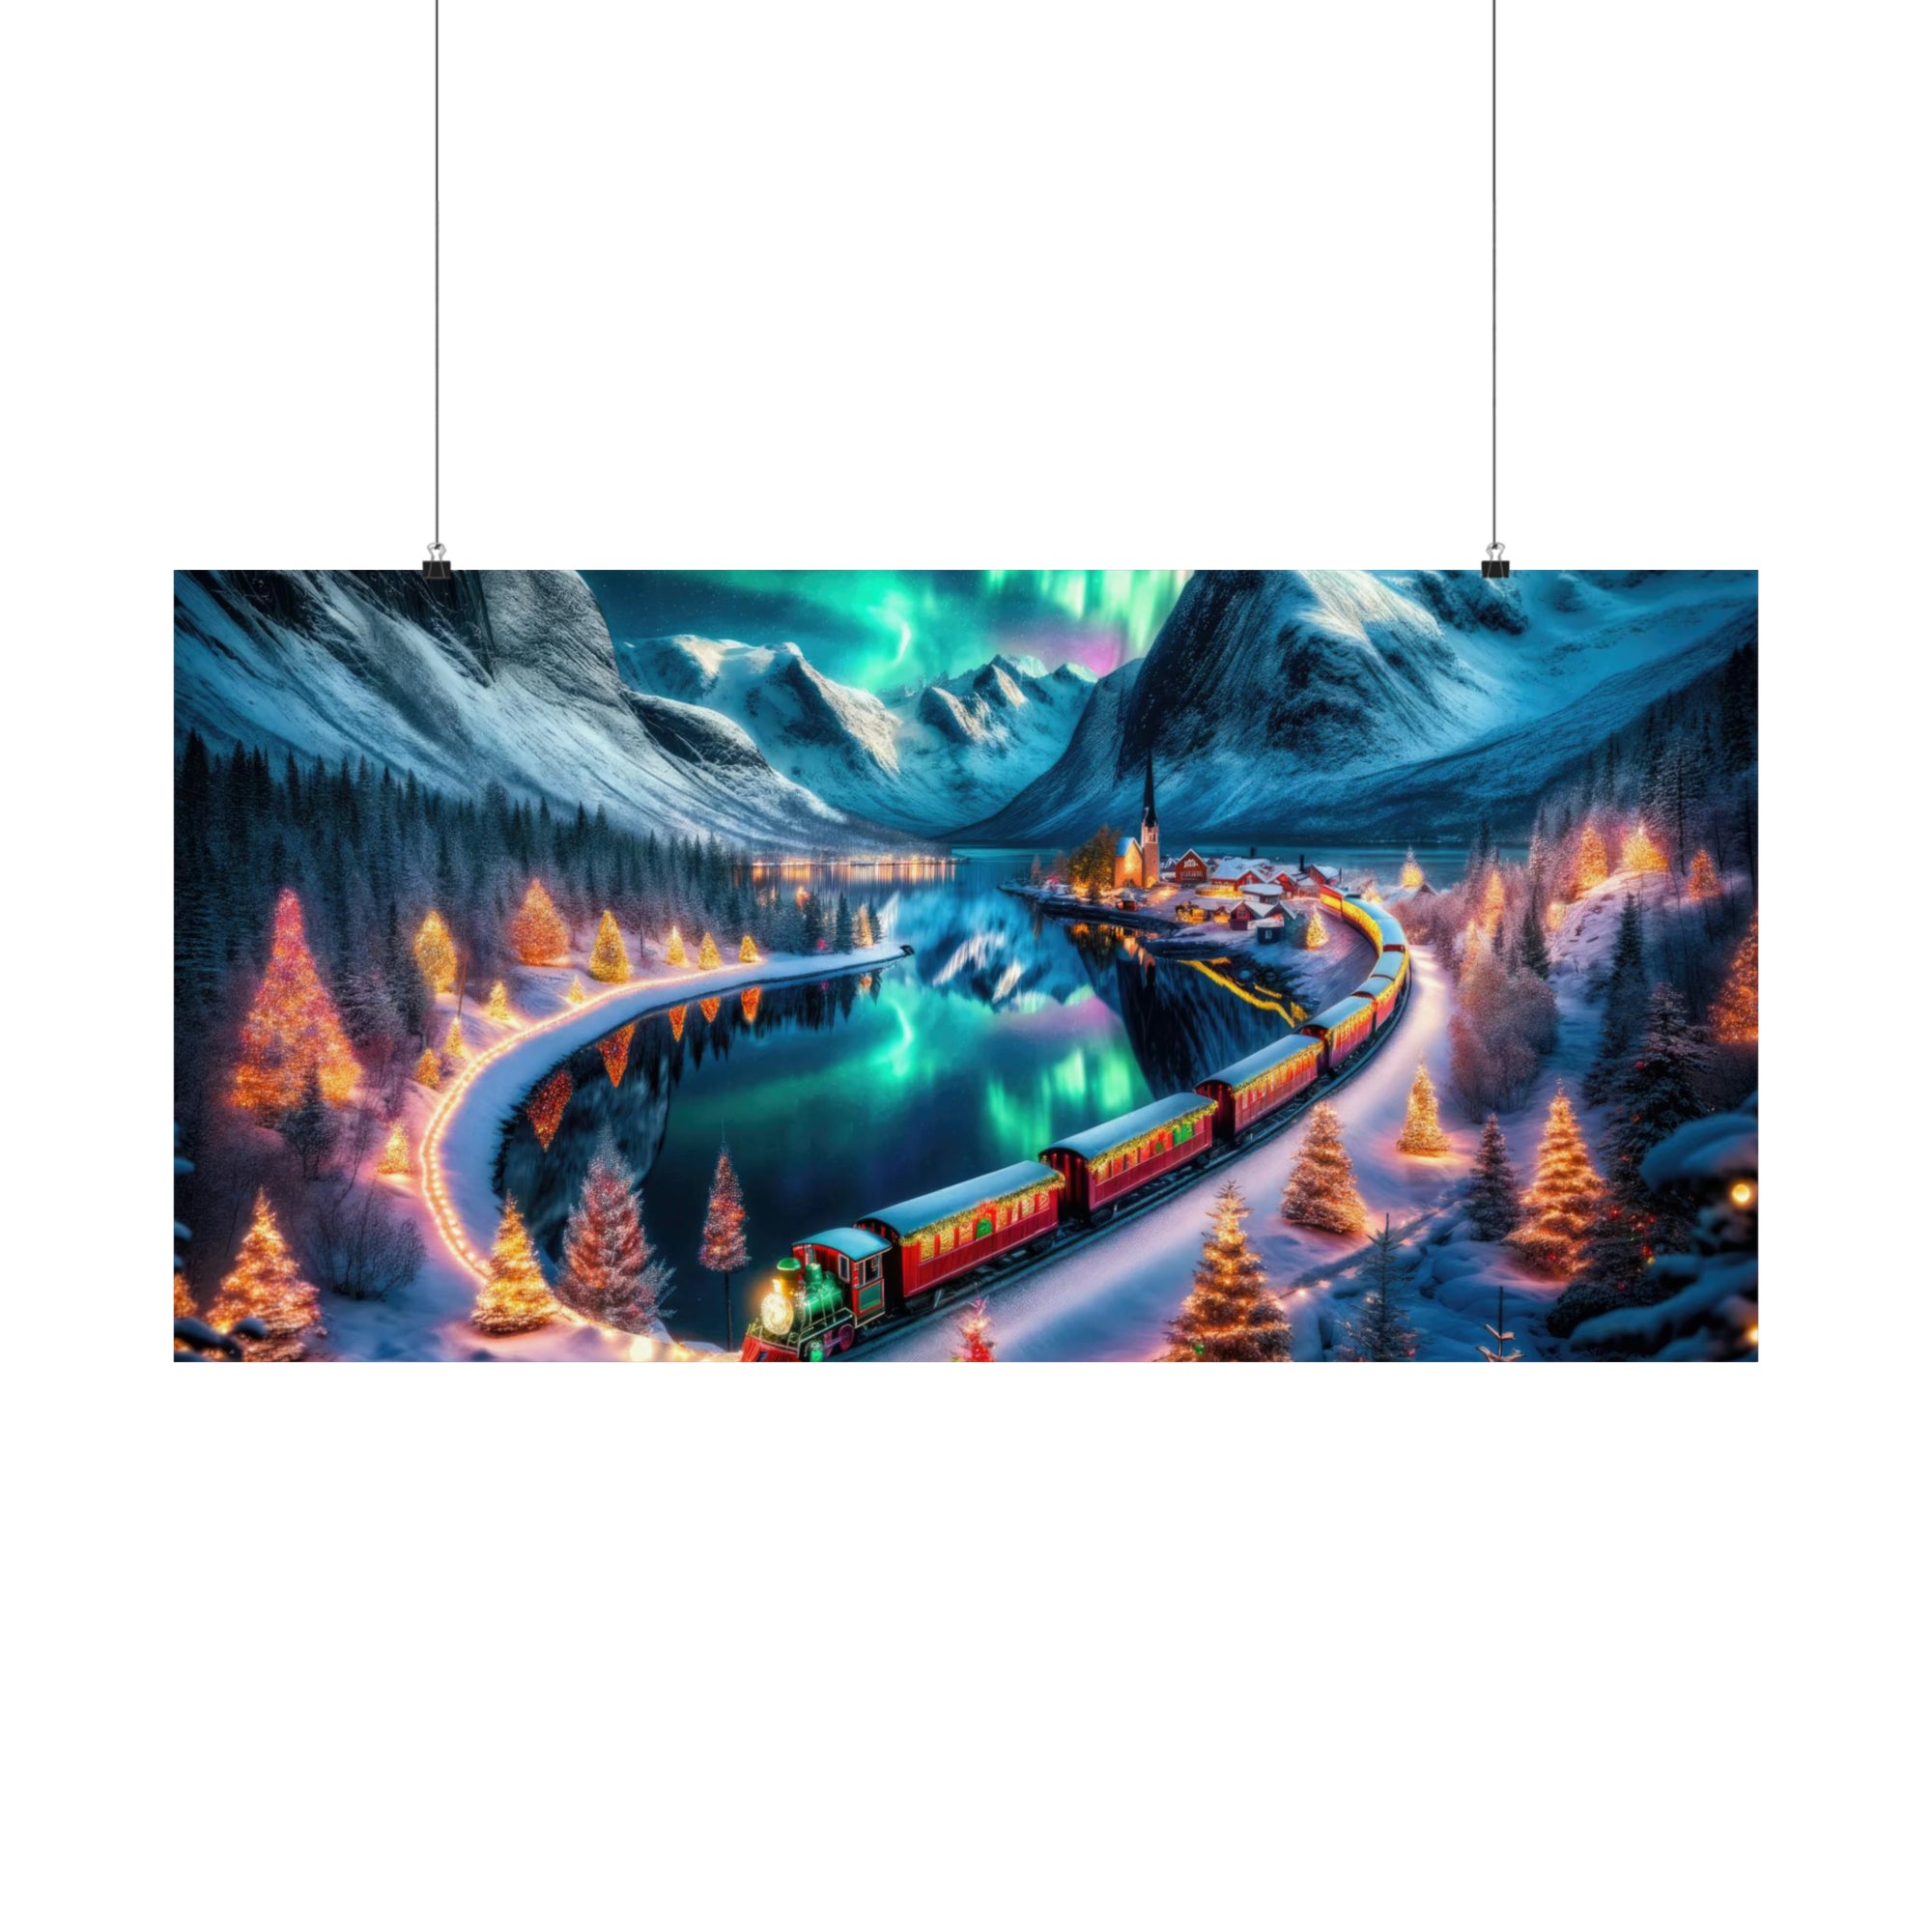 A Winter's Eve Journey Poster